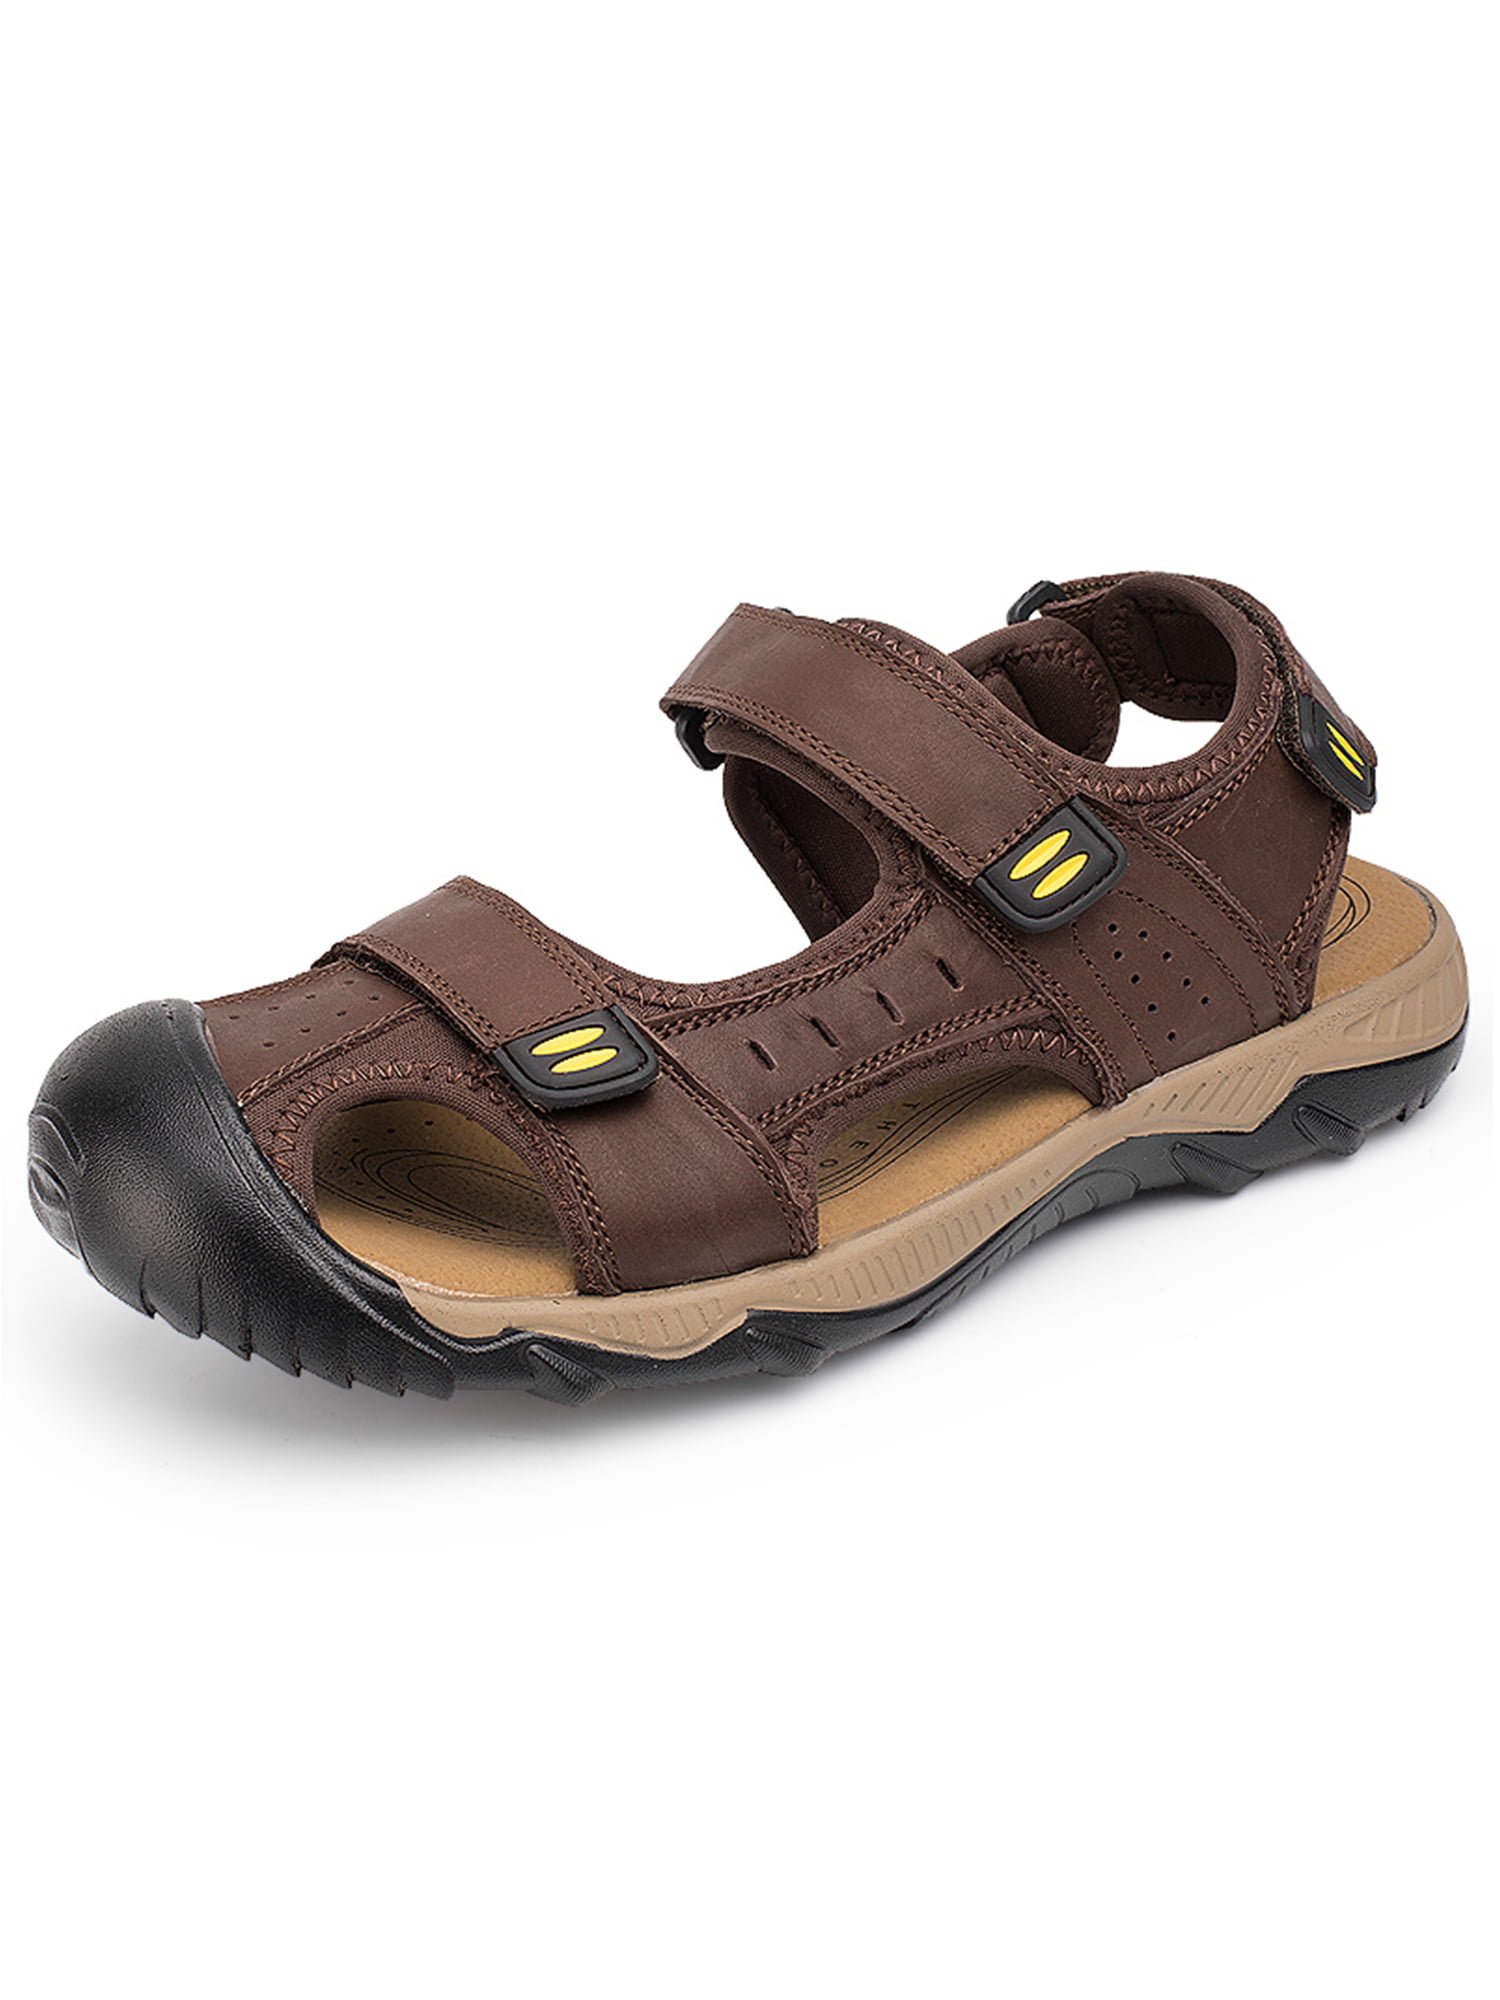 Men Sports Closed Toe Water Sandals Outdoor Leather Casual Hiking Shoes Summer